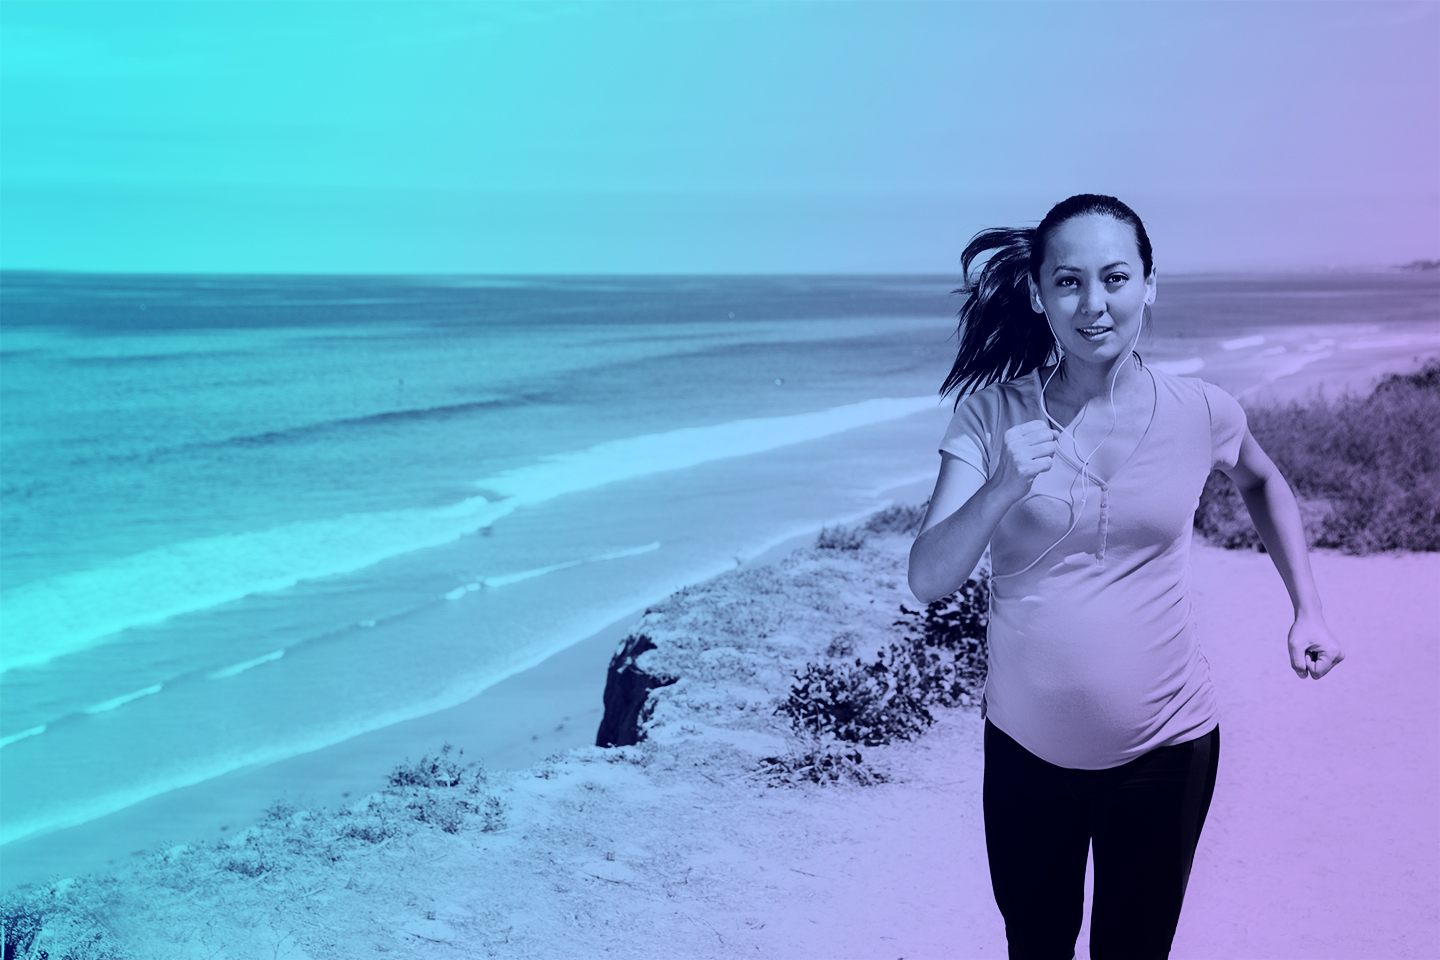 Pregnant woman going for a jog at the beach